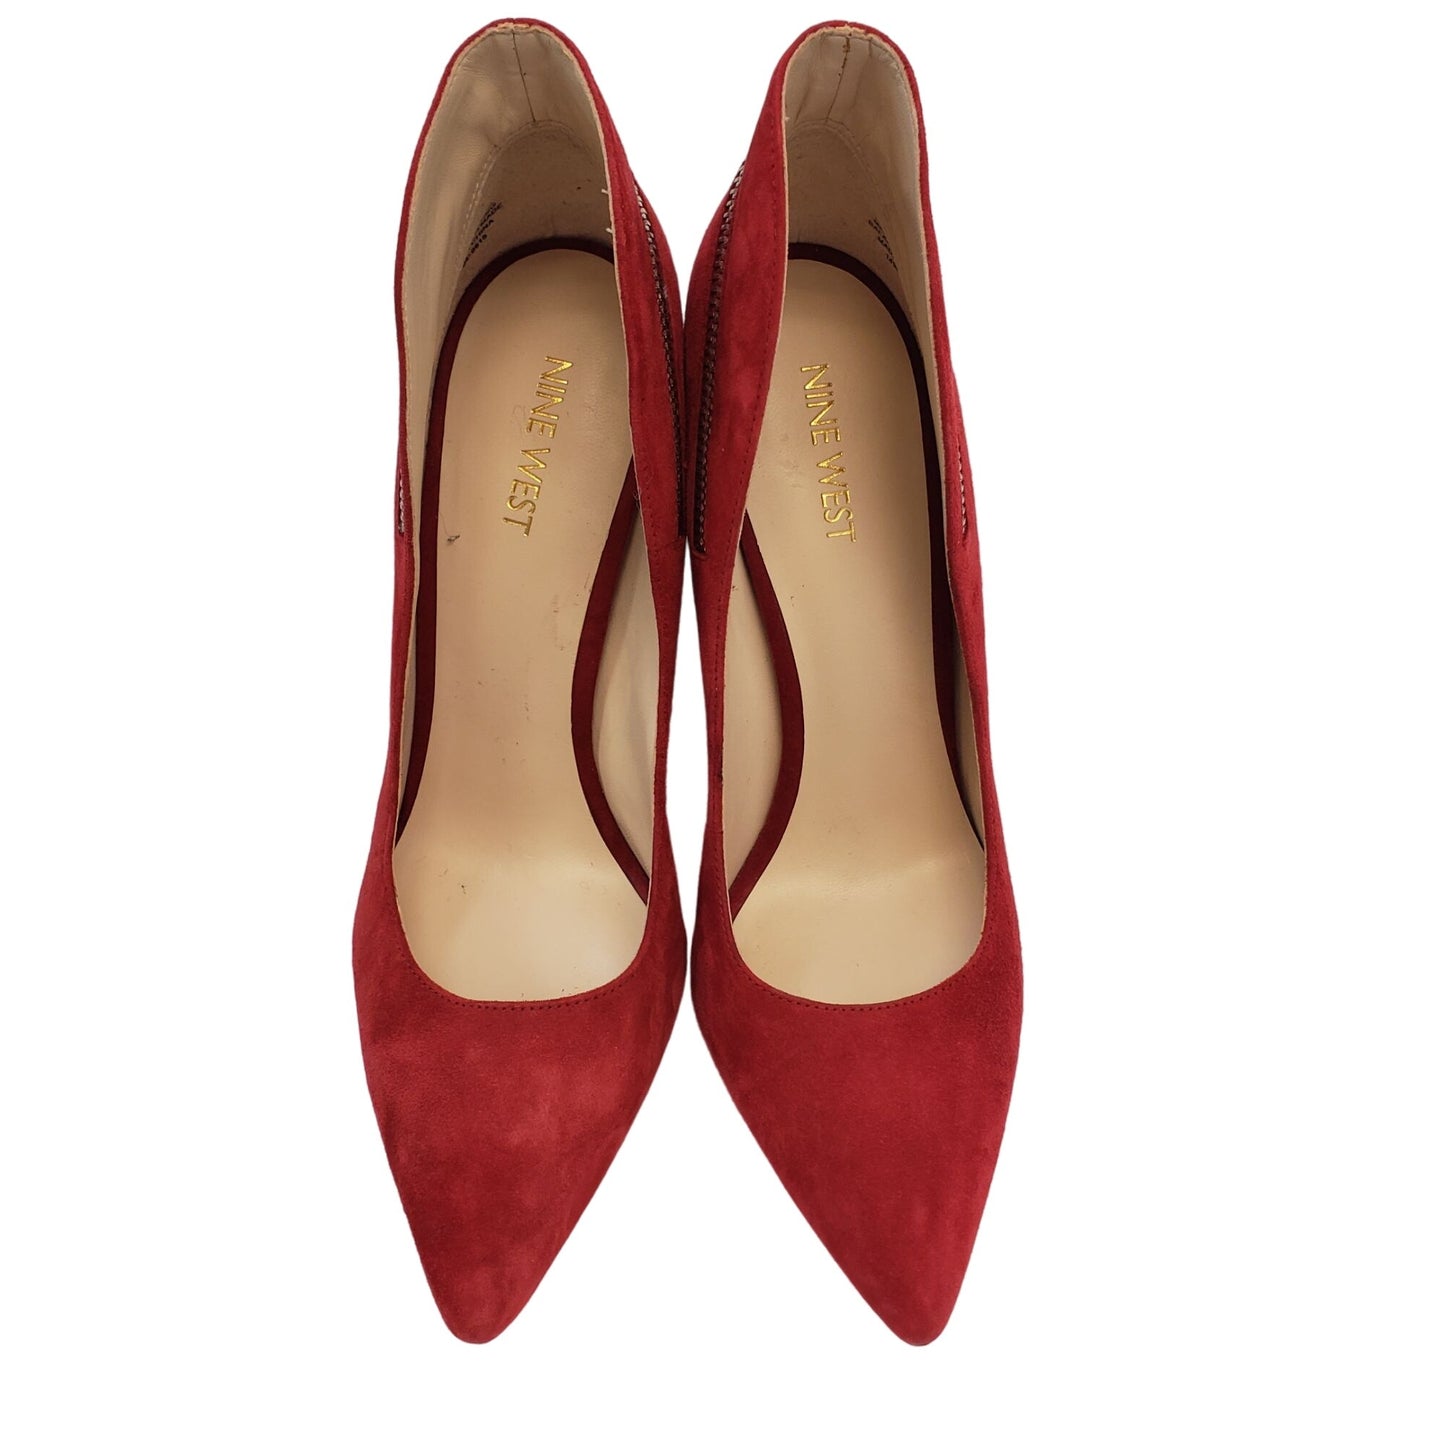 Nine West Red Suede Leather Zipper Accent Pumps Size 8